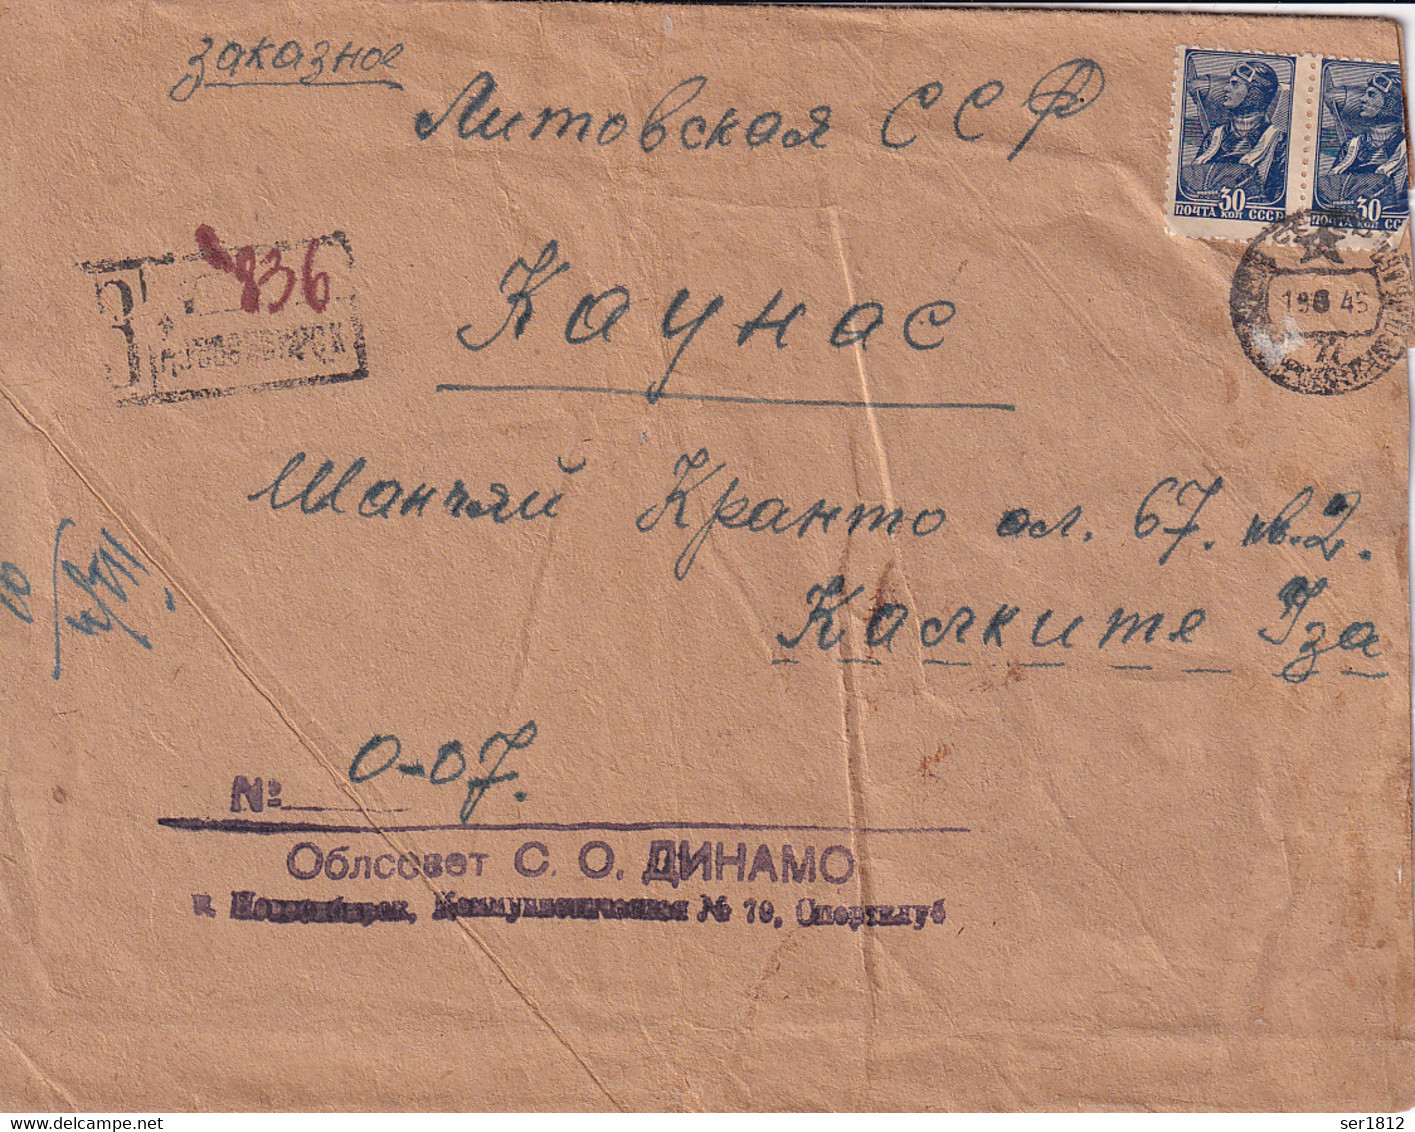 Russia Ussr 1945 Cover And Letter  From Gulag Novosibirsk To Kaunas Lithuania - Covers & Documents